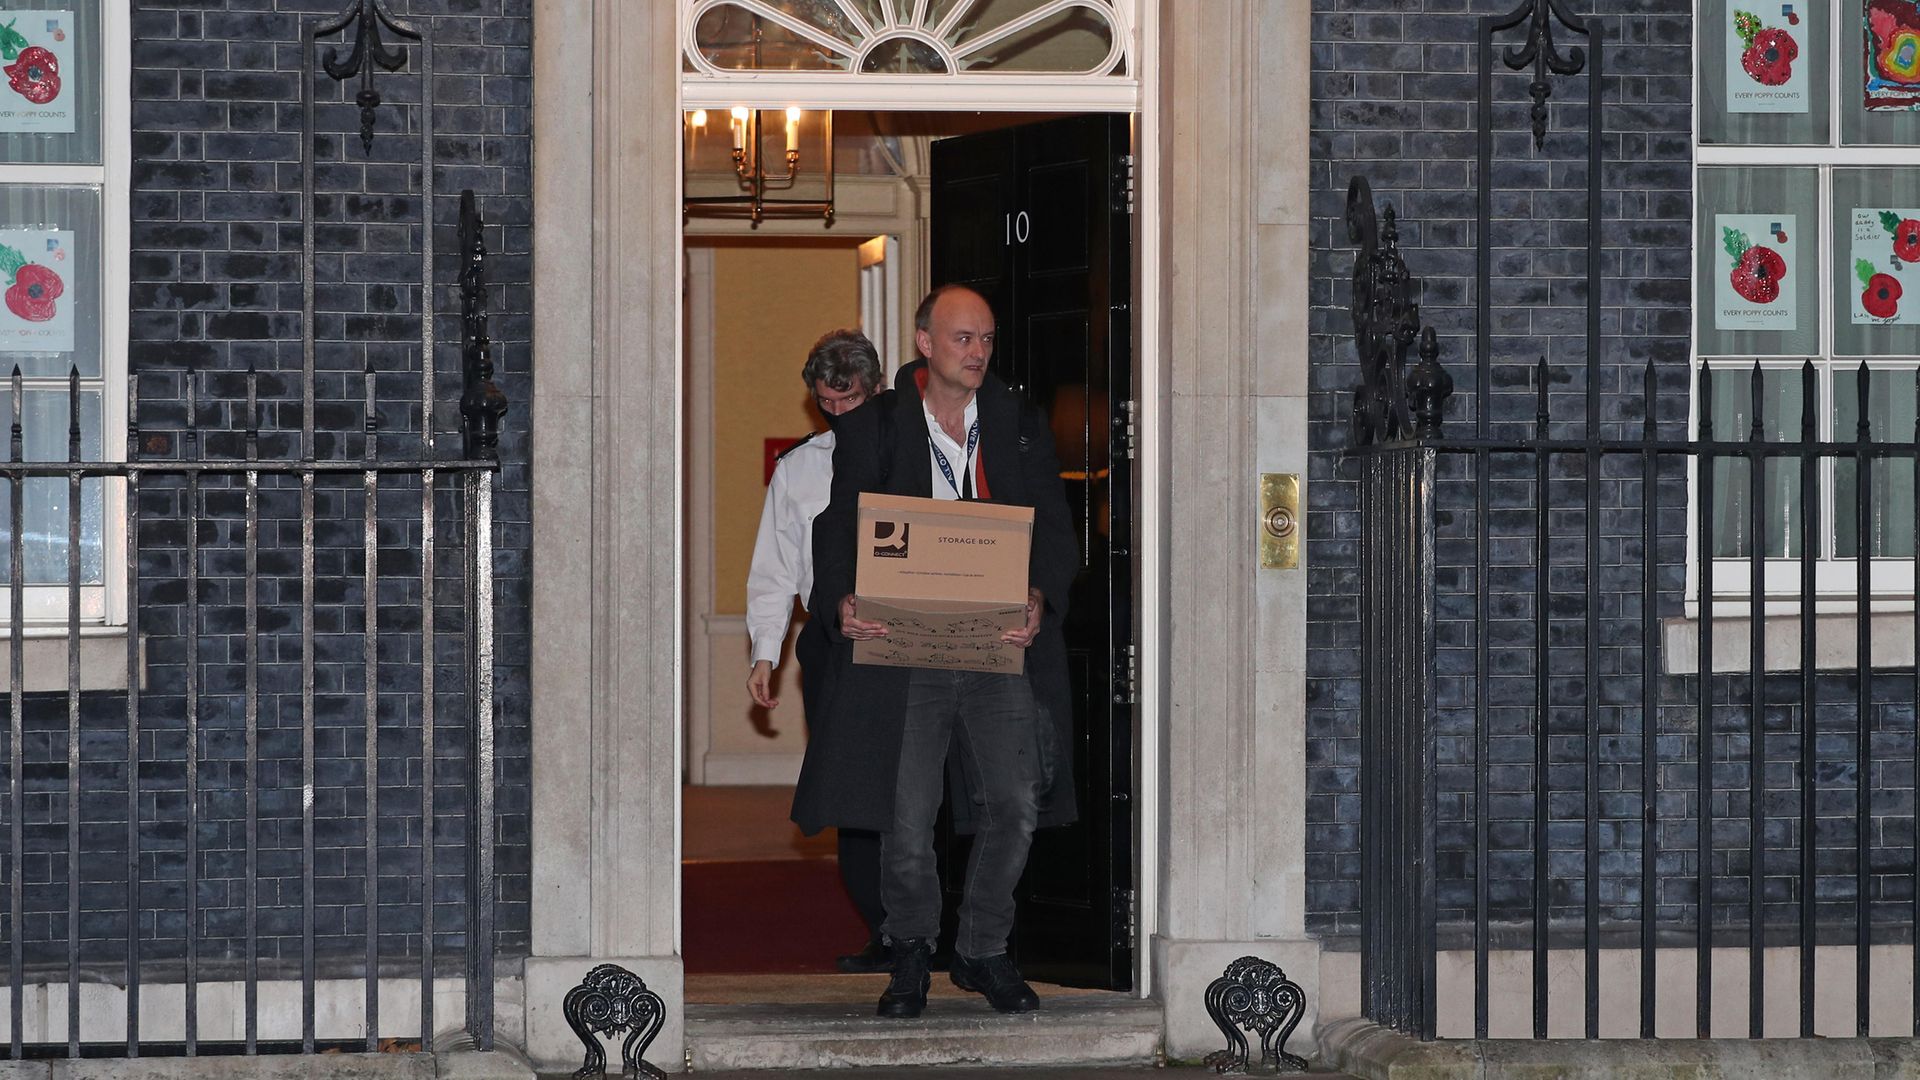 Dominic Cummings leaves 10 Downing Street, London, following his resignation - Credit: PA